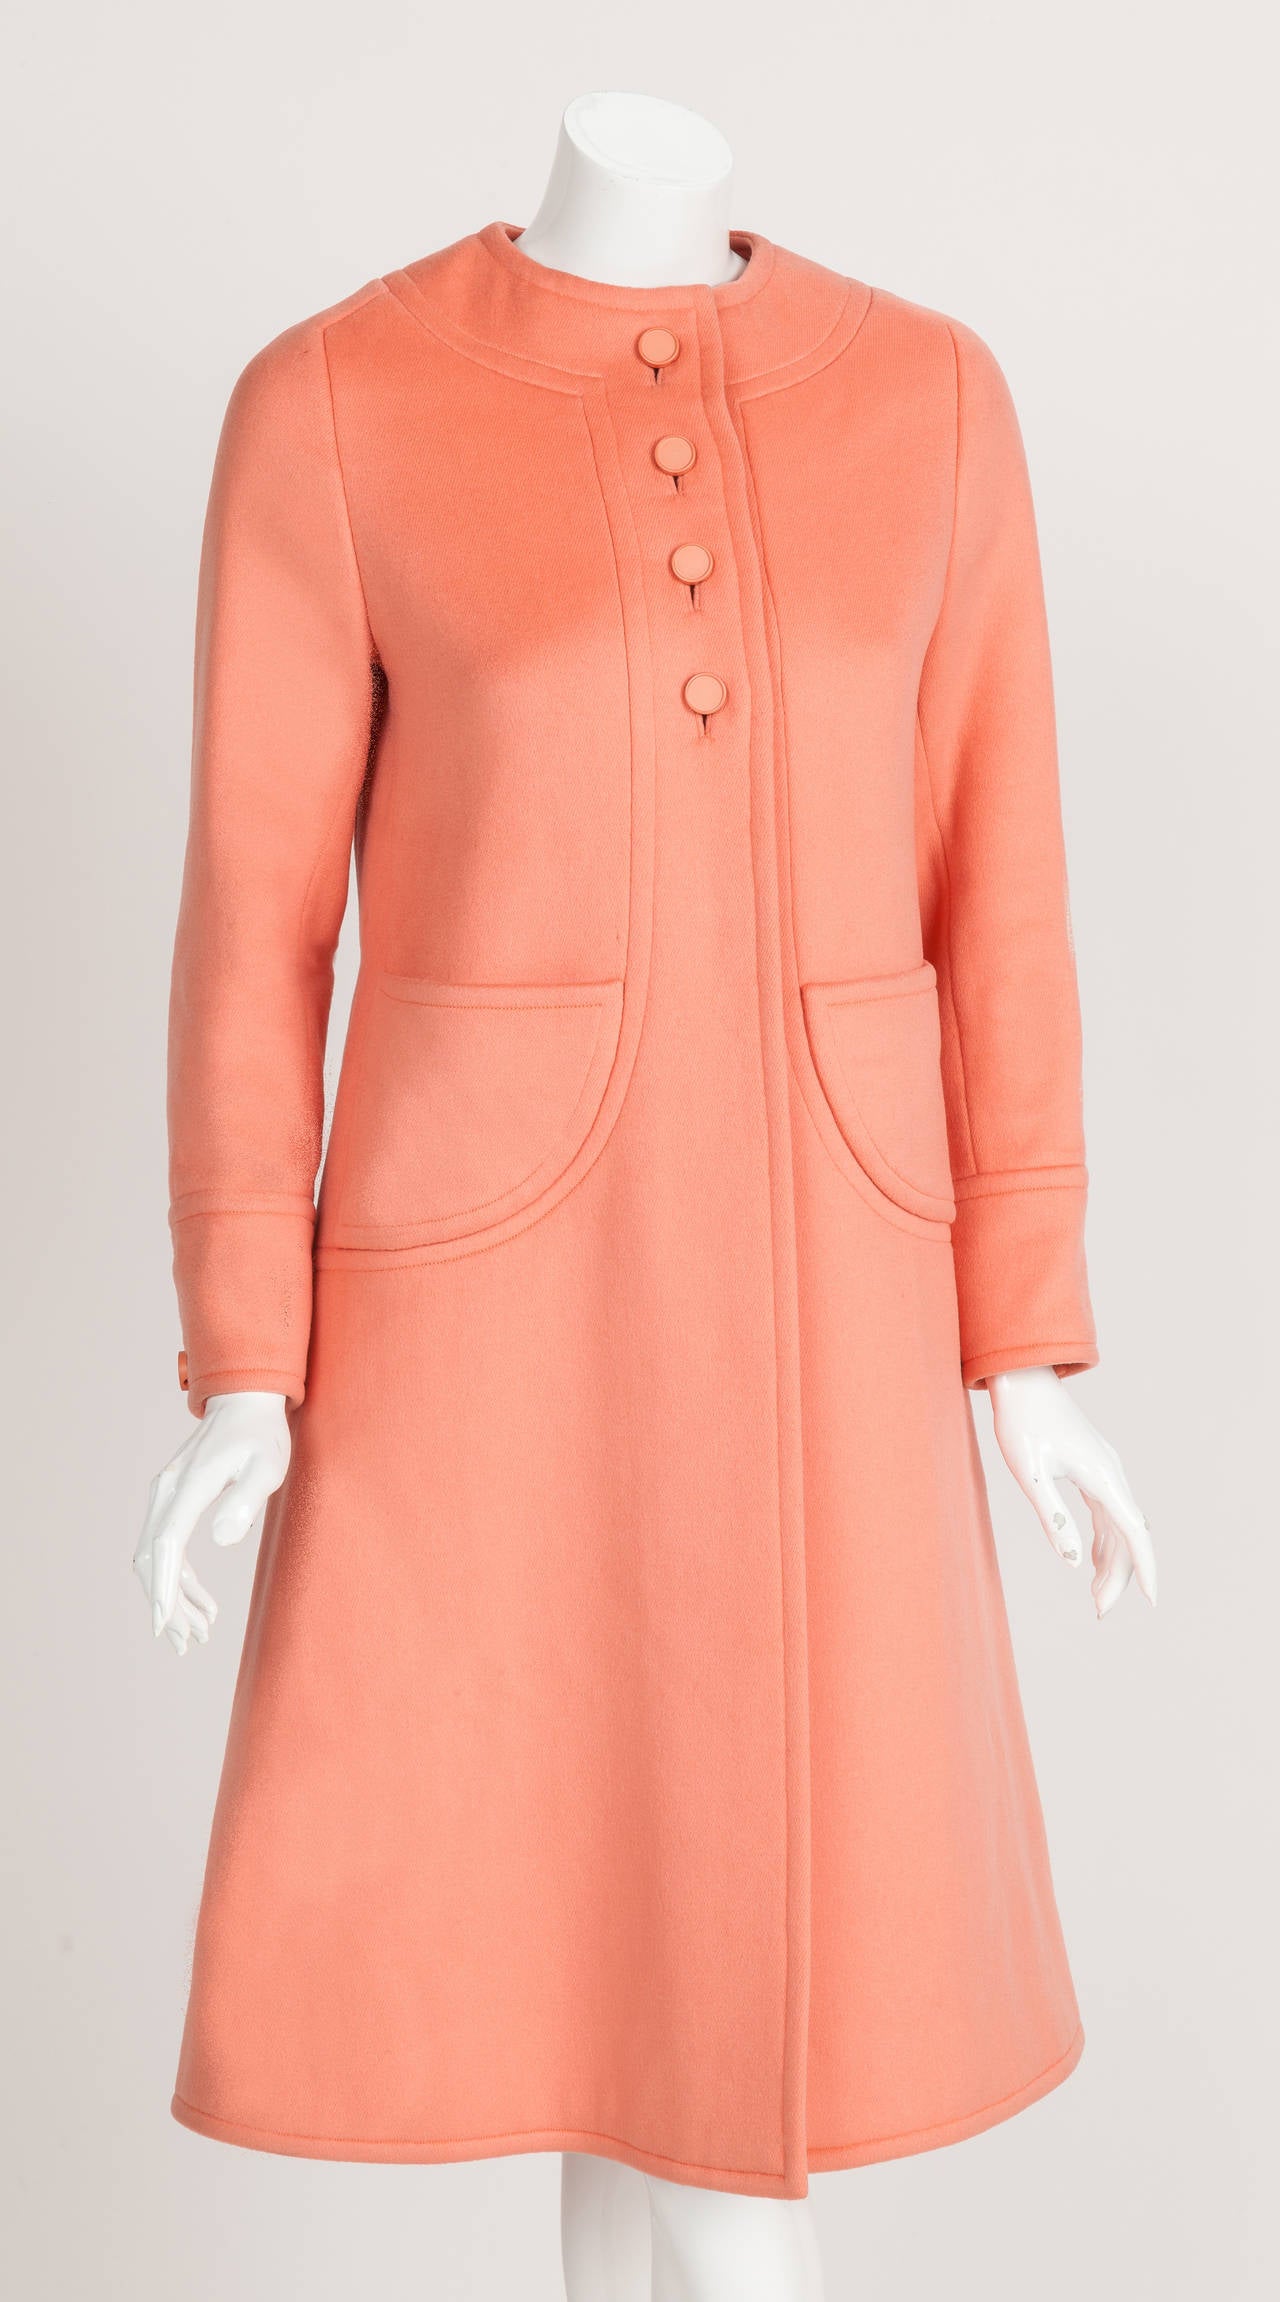 I'm a huge fan of Philippe Venet, who worked as Givenchy's master tailor until founding his own maison de haute couture in 1962. Since his garments are hard to find, I was thrilled to come across this circa 1970 salmon-colored, melton wool haute